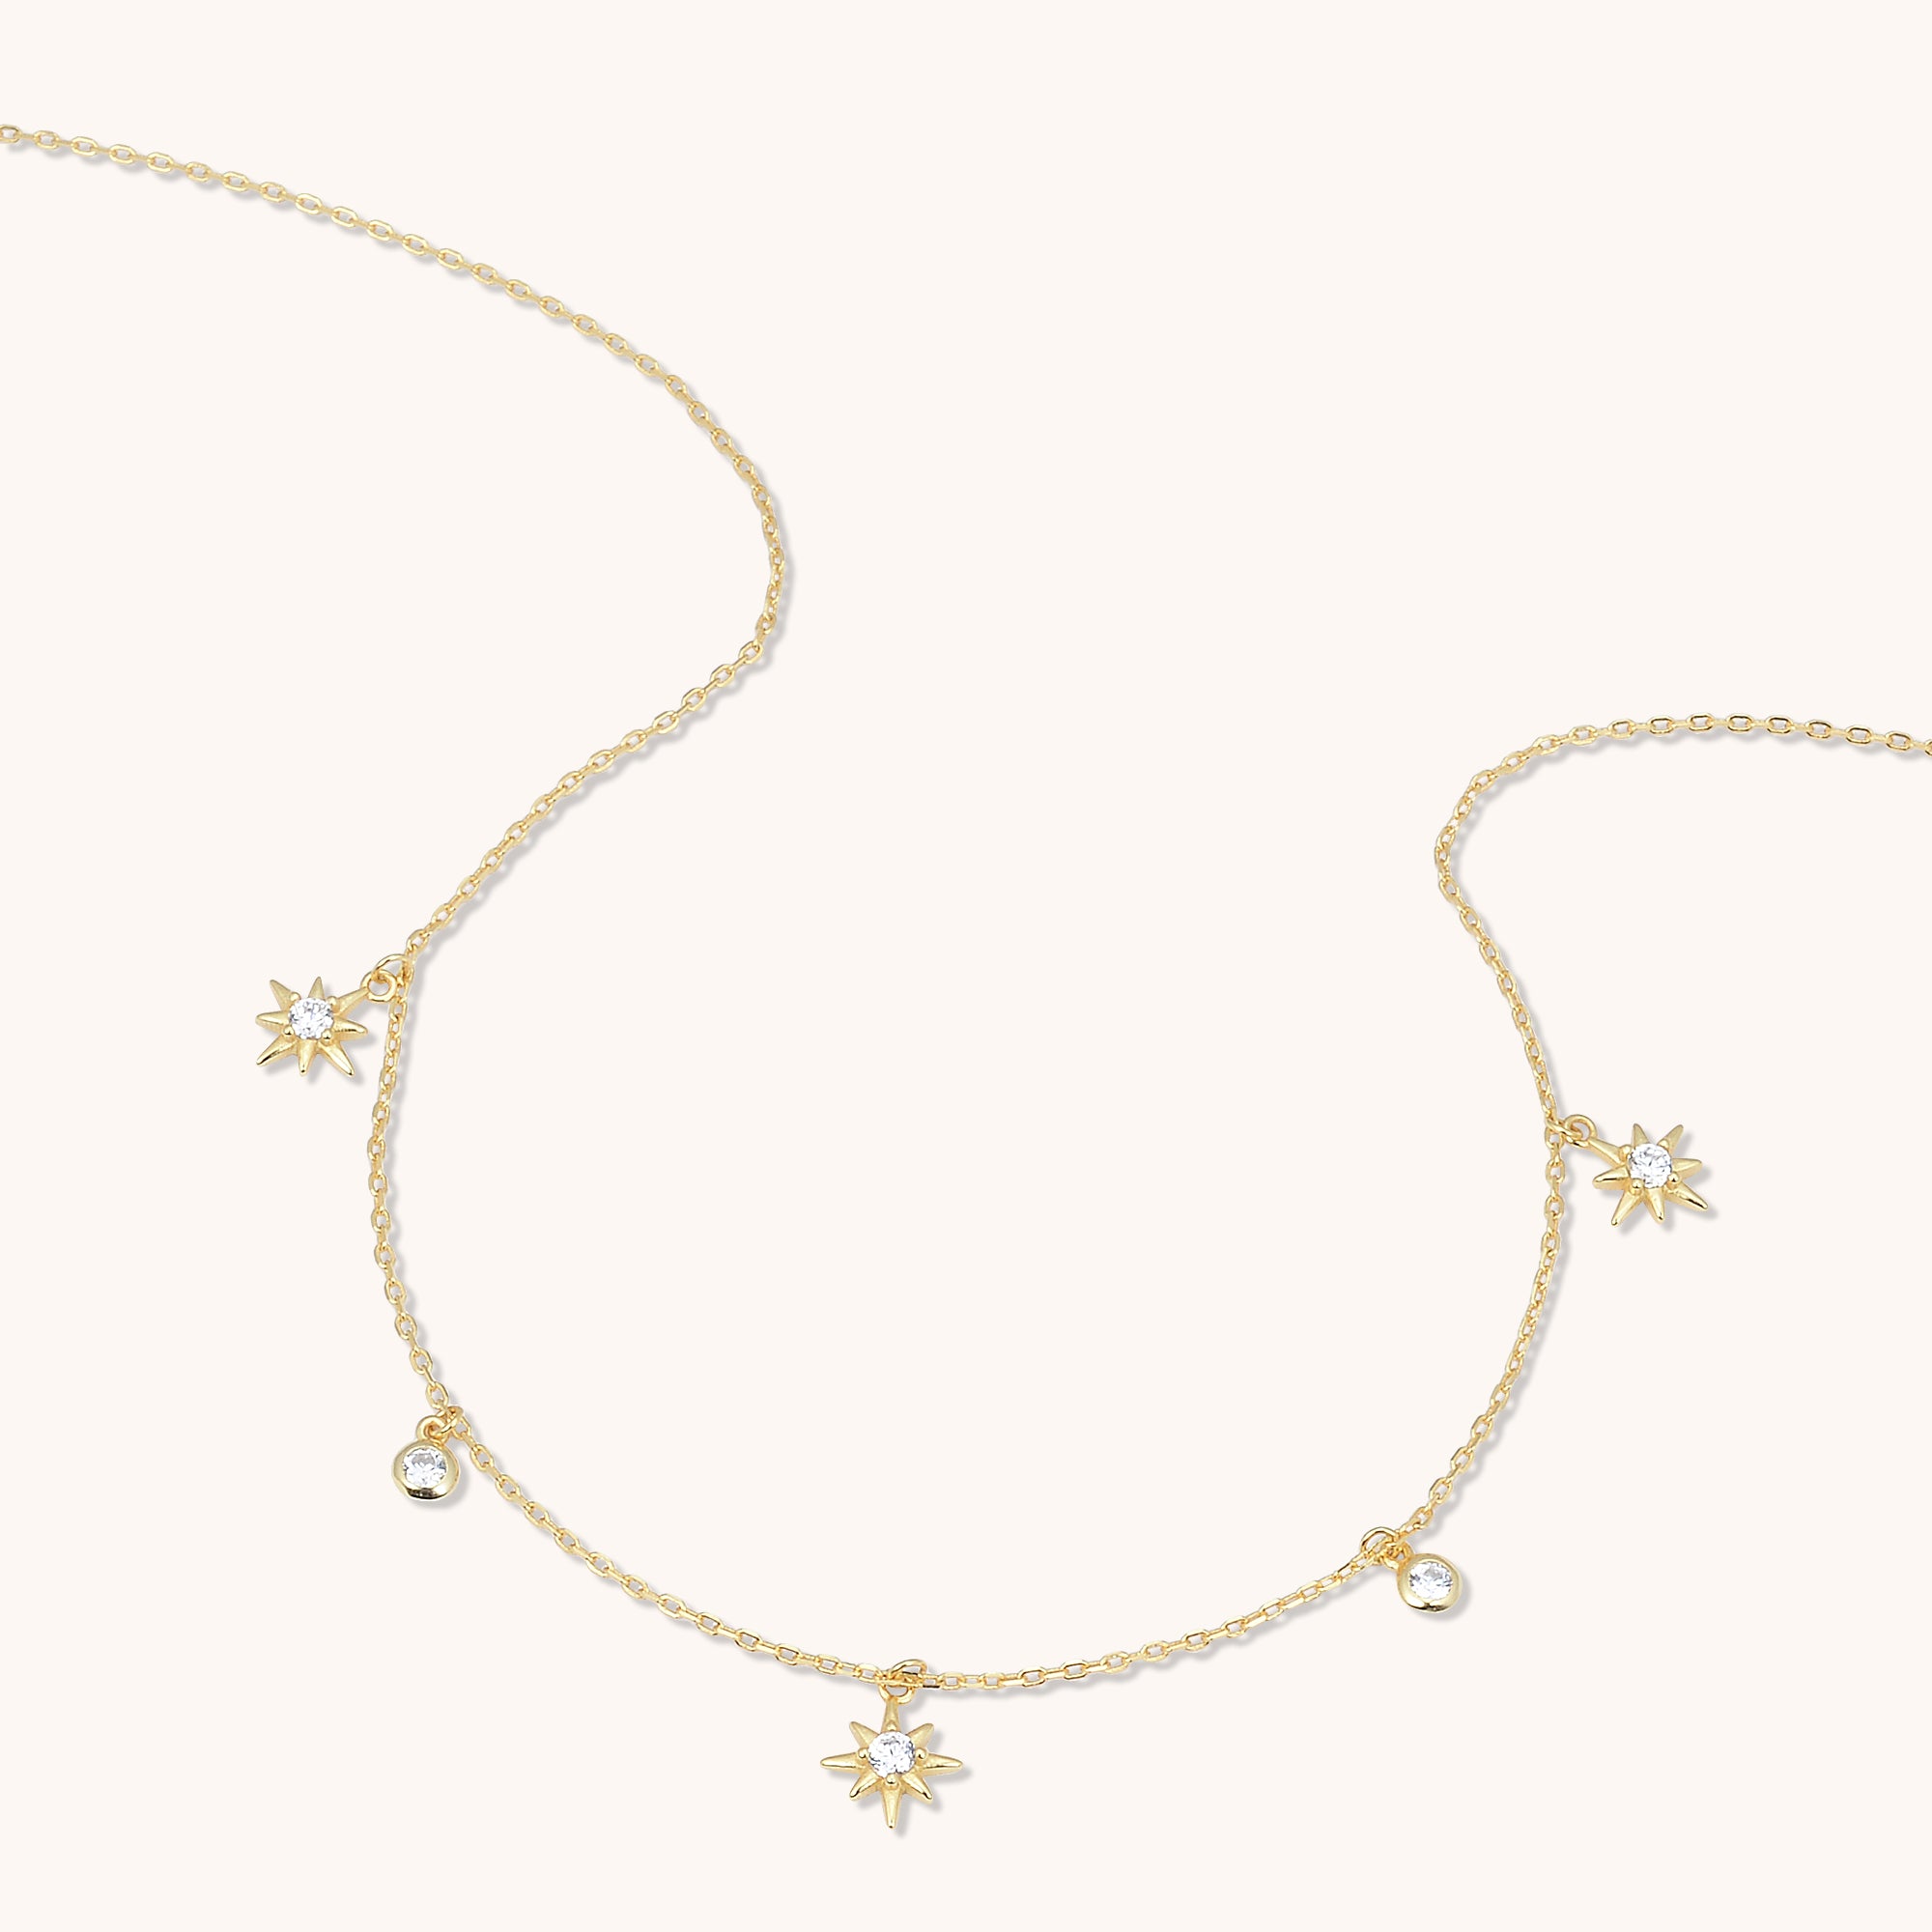 North Star Dangling Necklace Gold